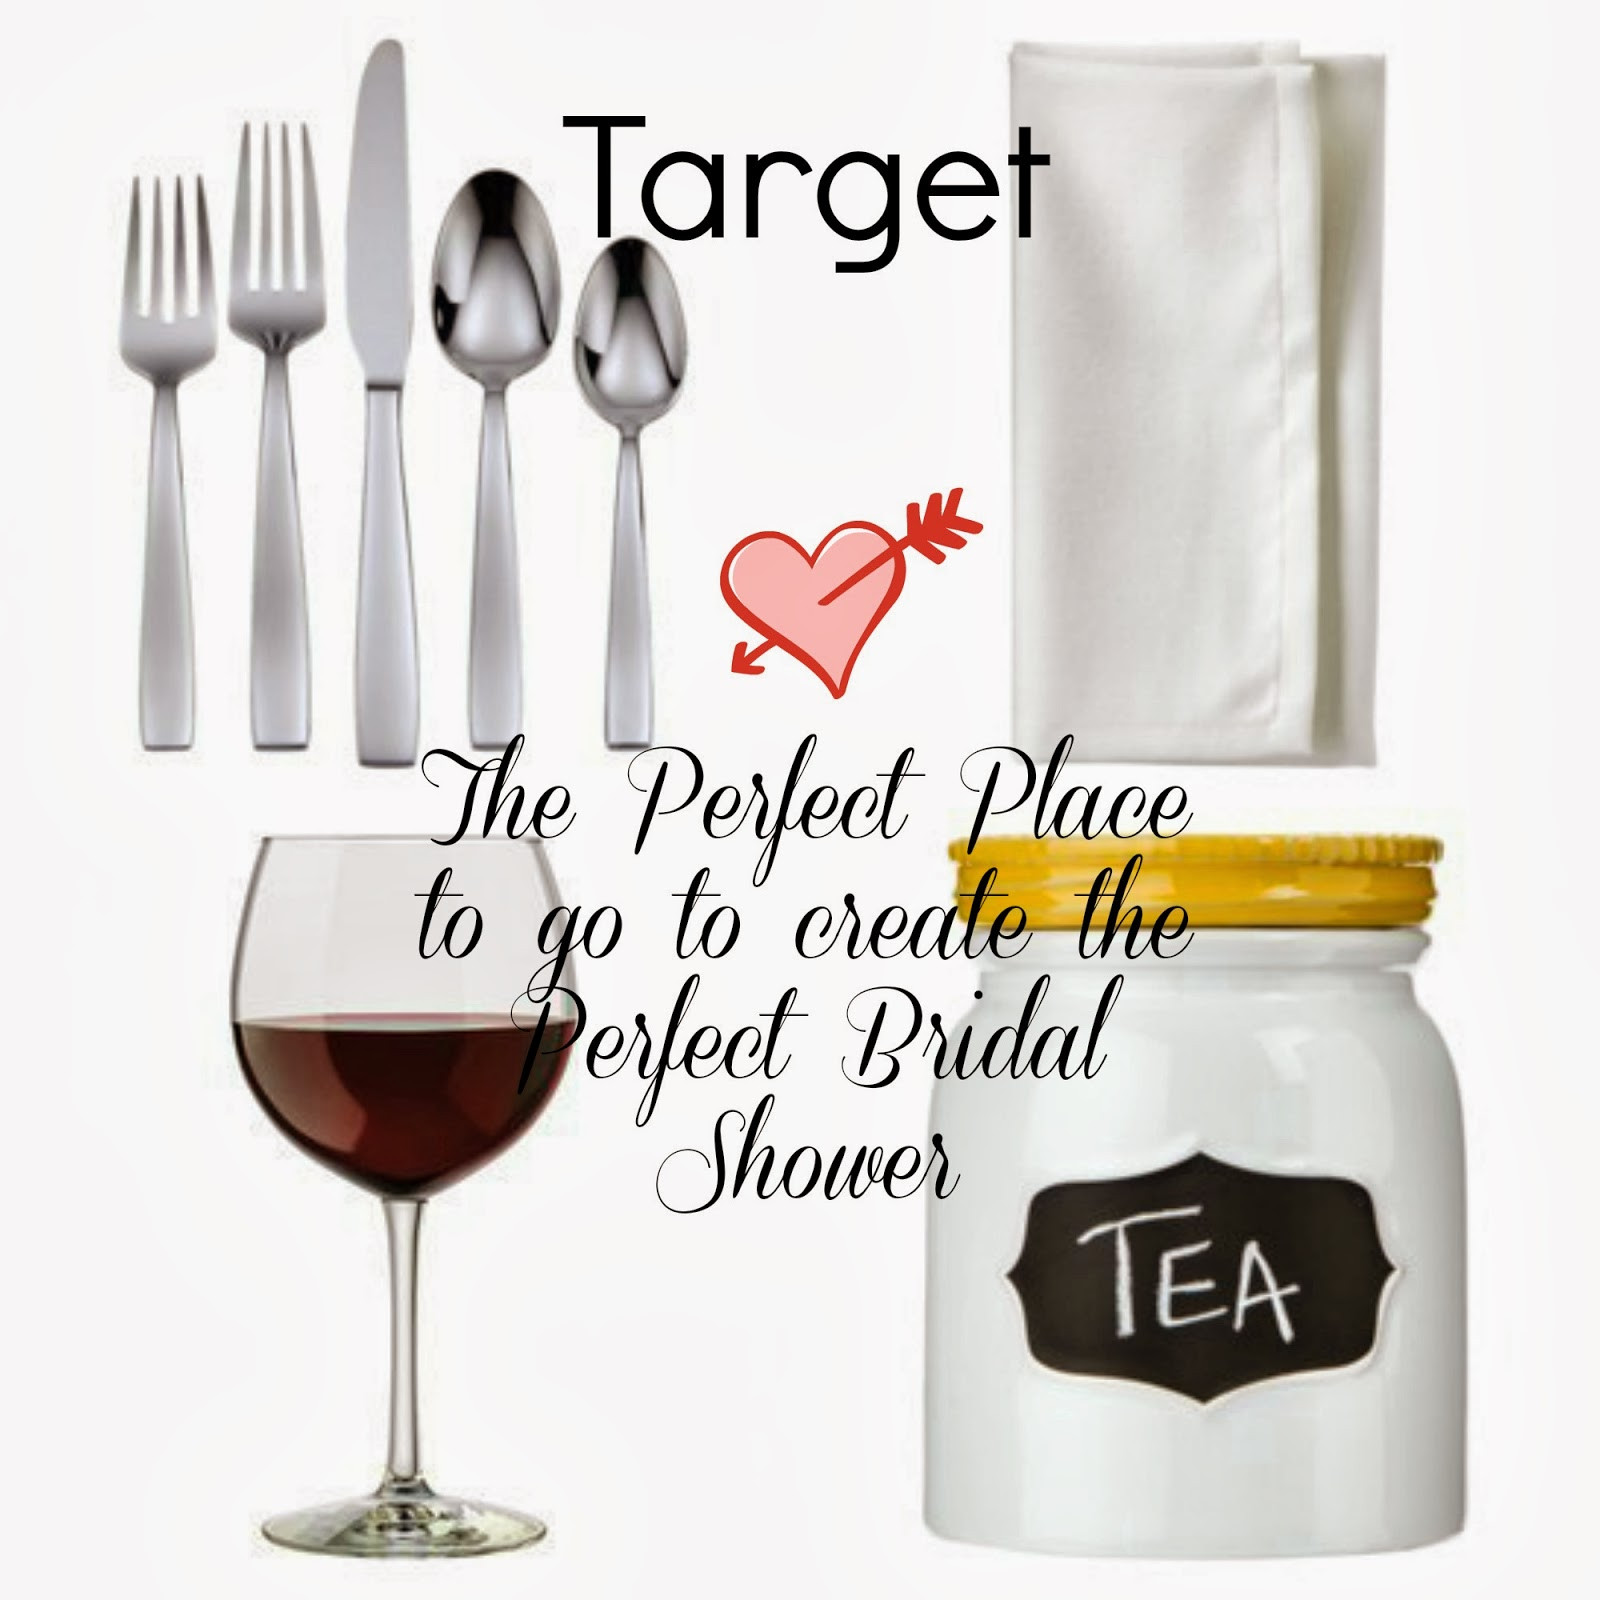 Wedding Gift Ideas Target
 DIY by Design Tar The Perfect Place to Plan a